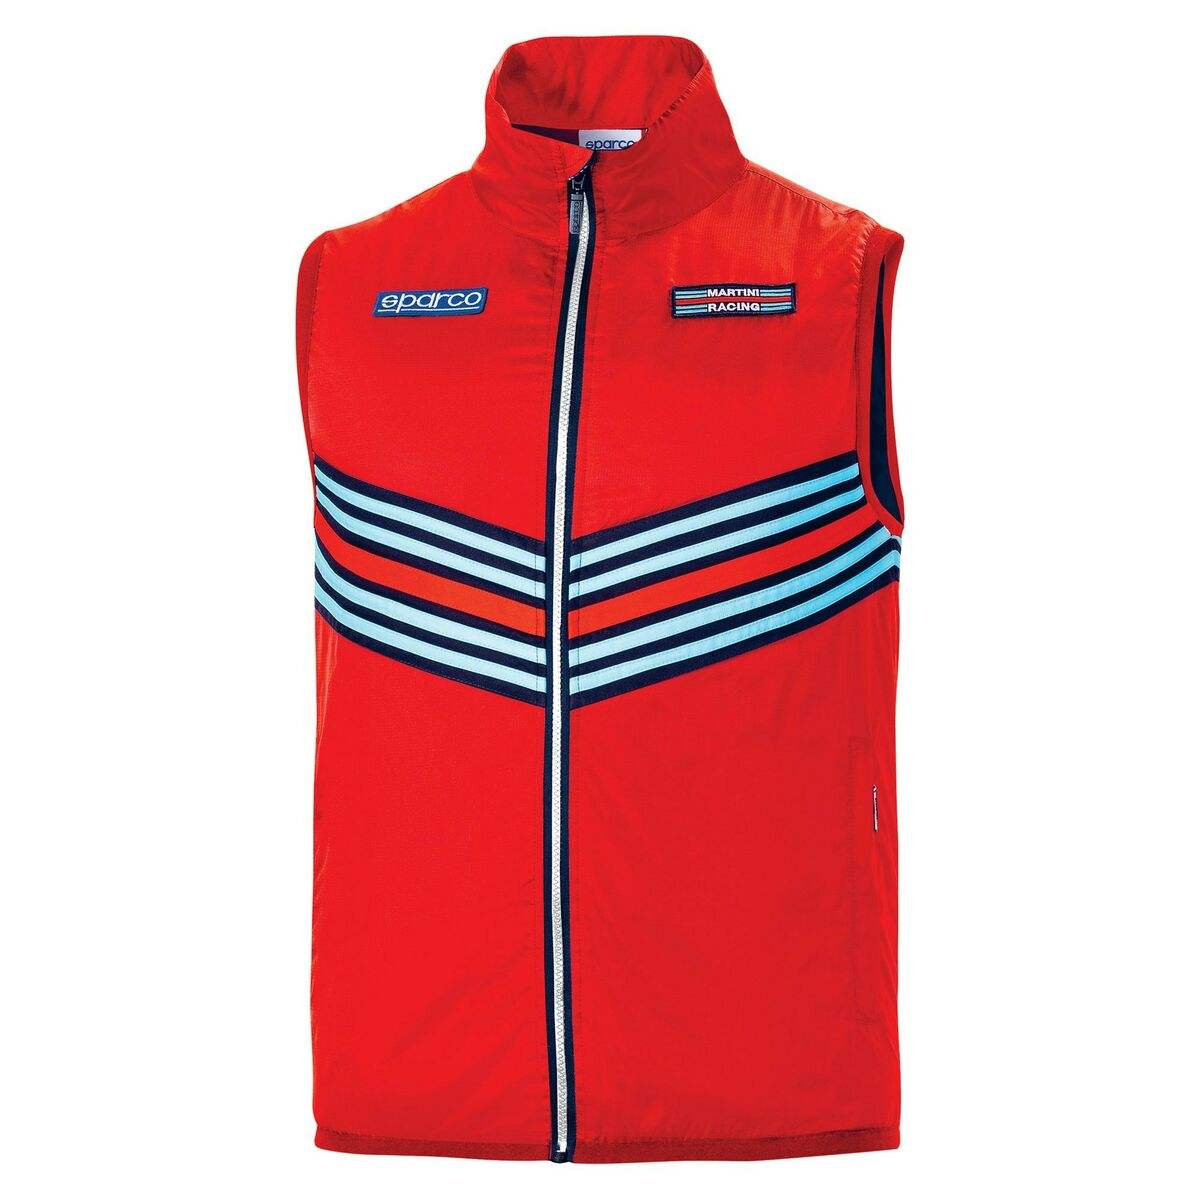 Weste Sparco Martini Racing Rot